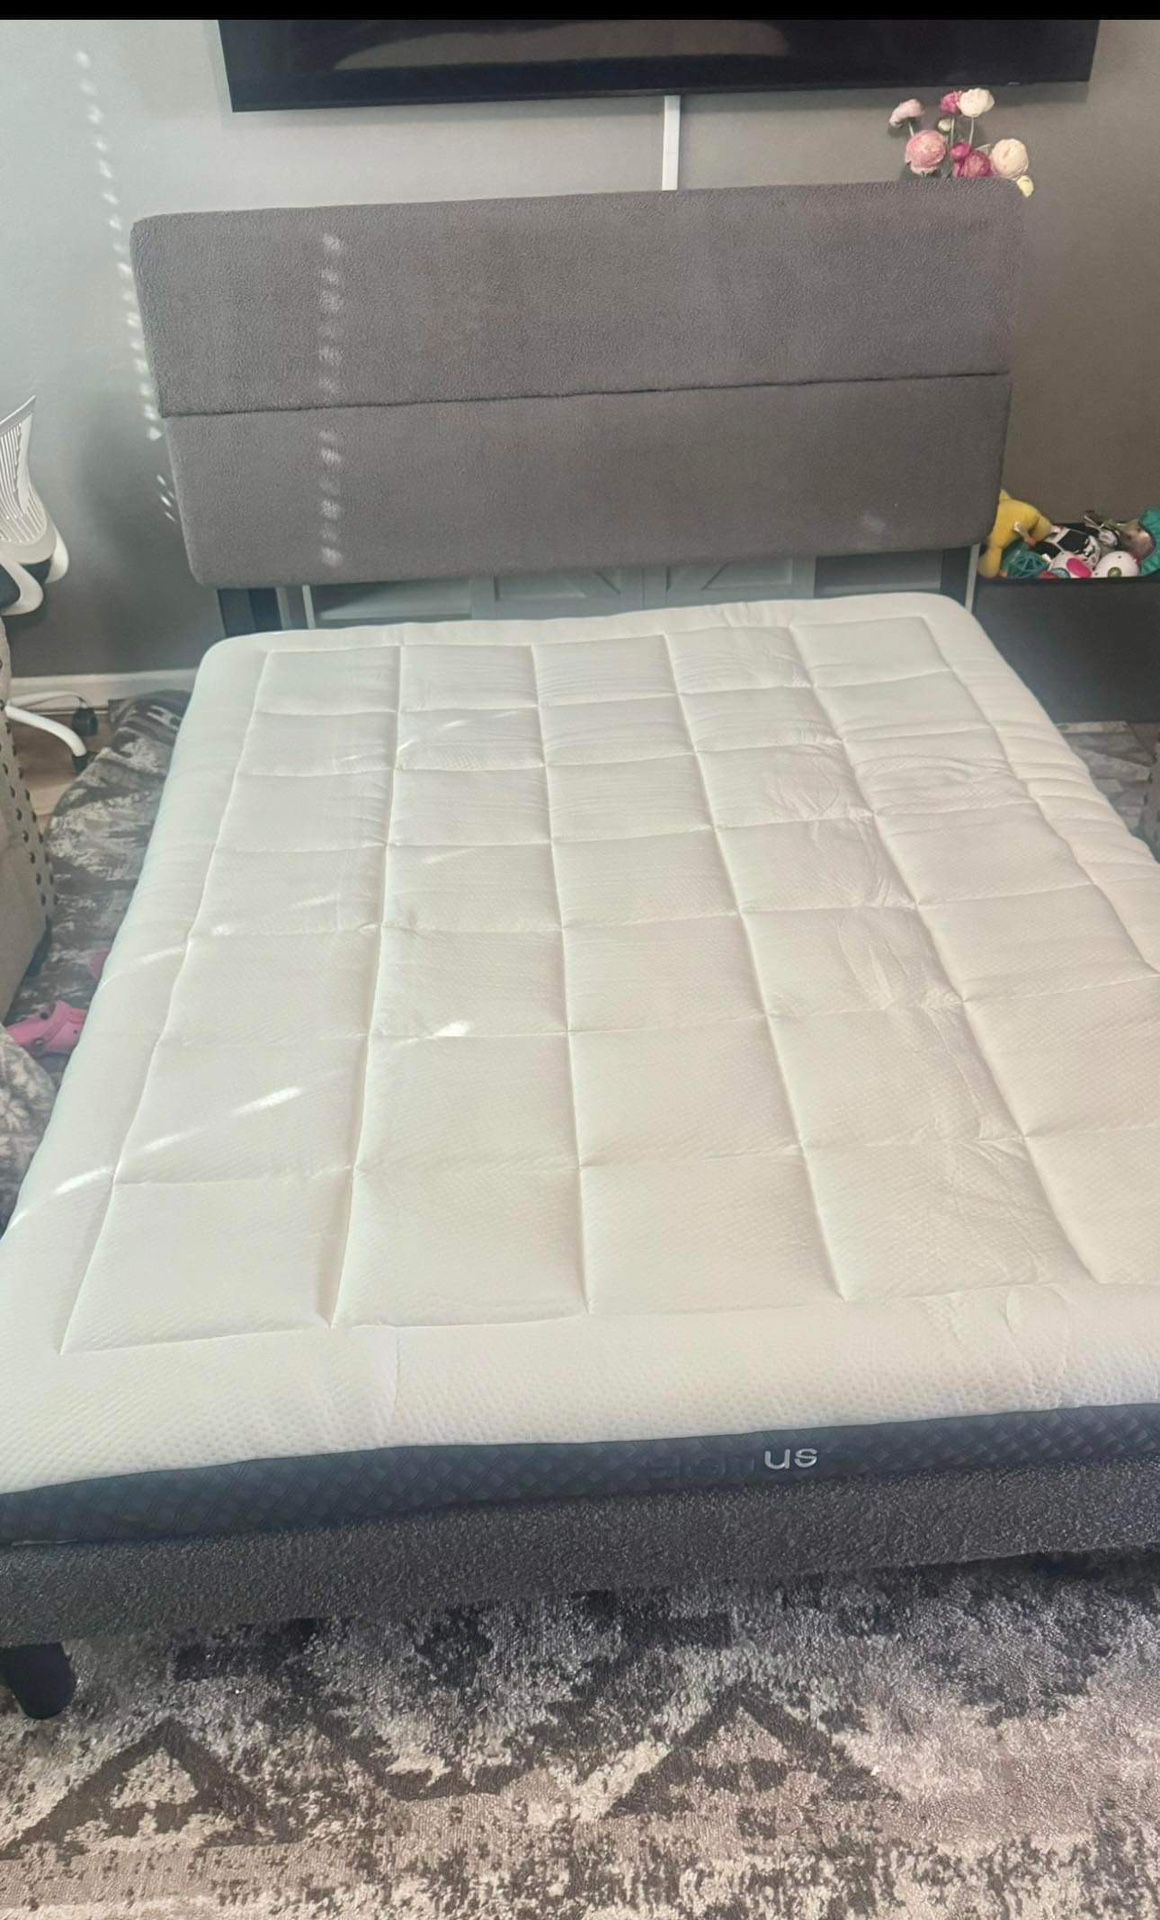 Queen Bed Frame With A Memory Foam Mattress 5 Inches 